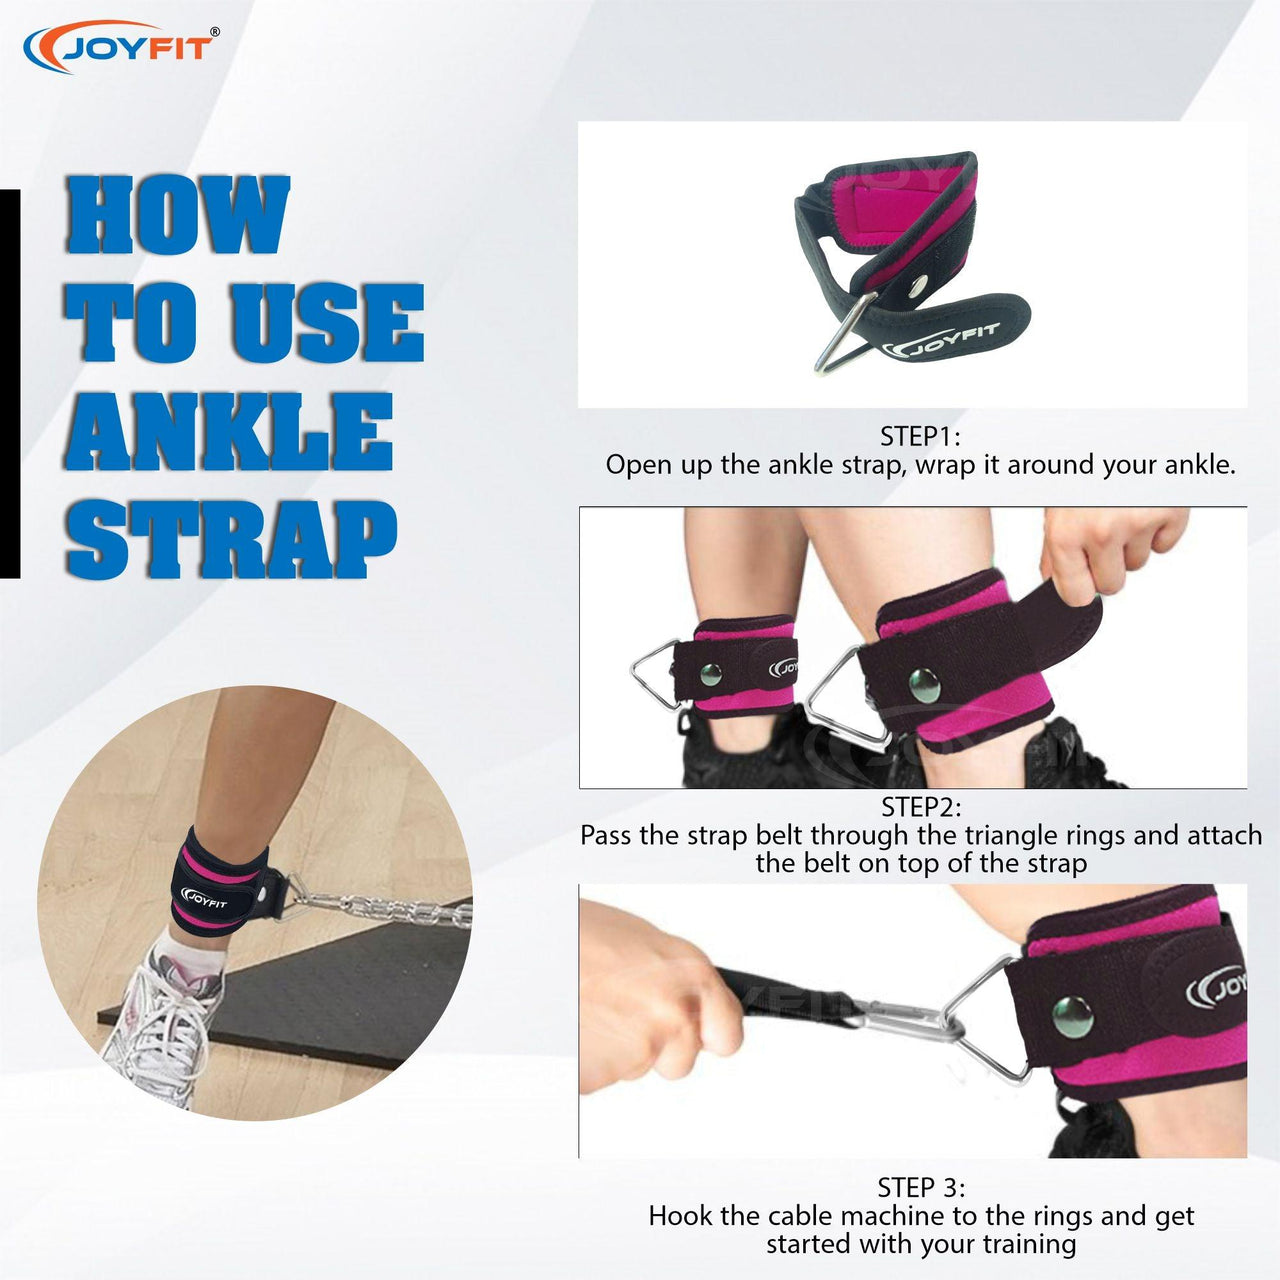 How to use ankle strap